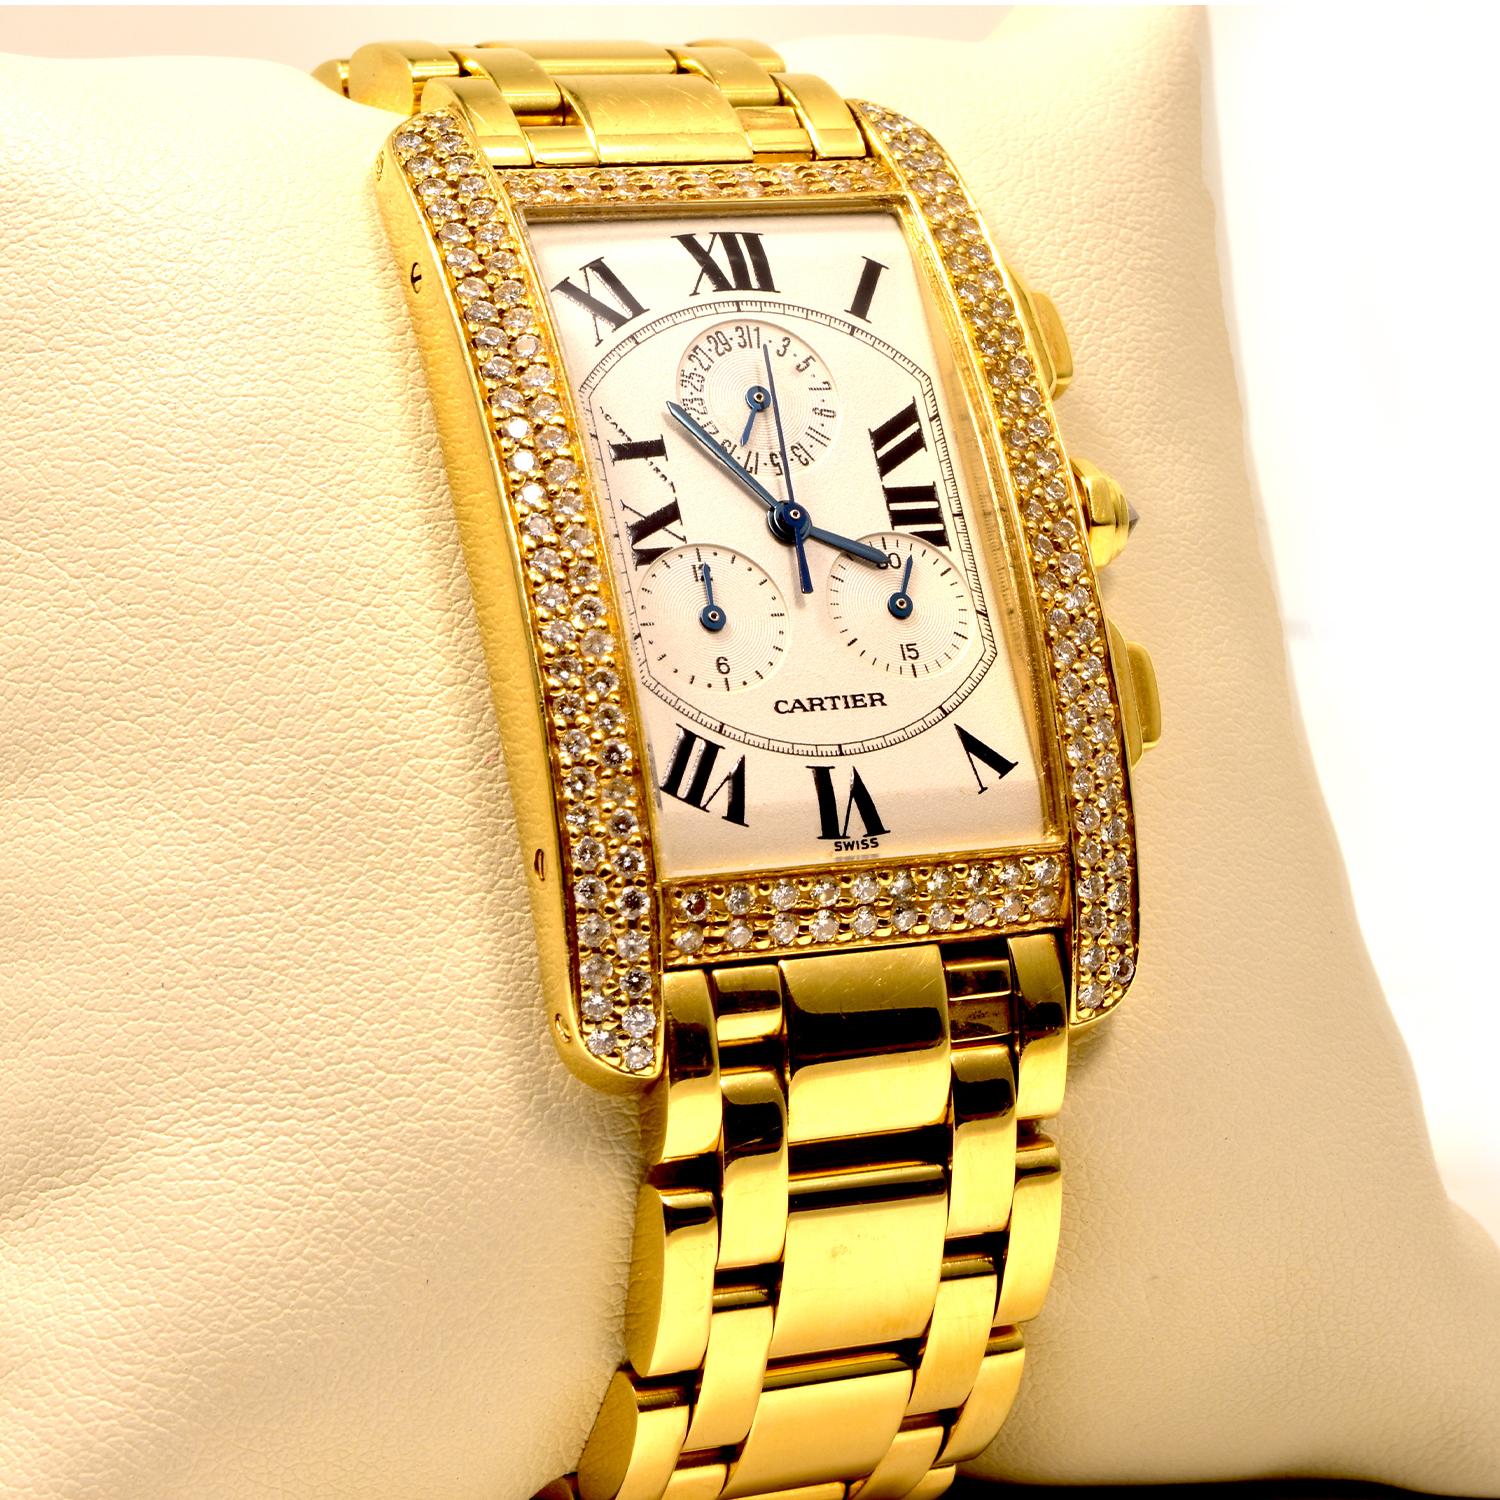 Brand: Cartier

Model: Tank Americaine

Reference: 1730

Movement: Quartz

Case Size: 26 x 45mm

Case Material: 18k Yellow Gold

Bracelet Material: 18k Yellow Gold 

Crystal: Scratch-Resistant Sapphire Glass

Dial:  White with Black Roman Numerals